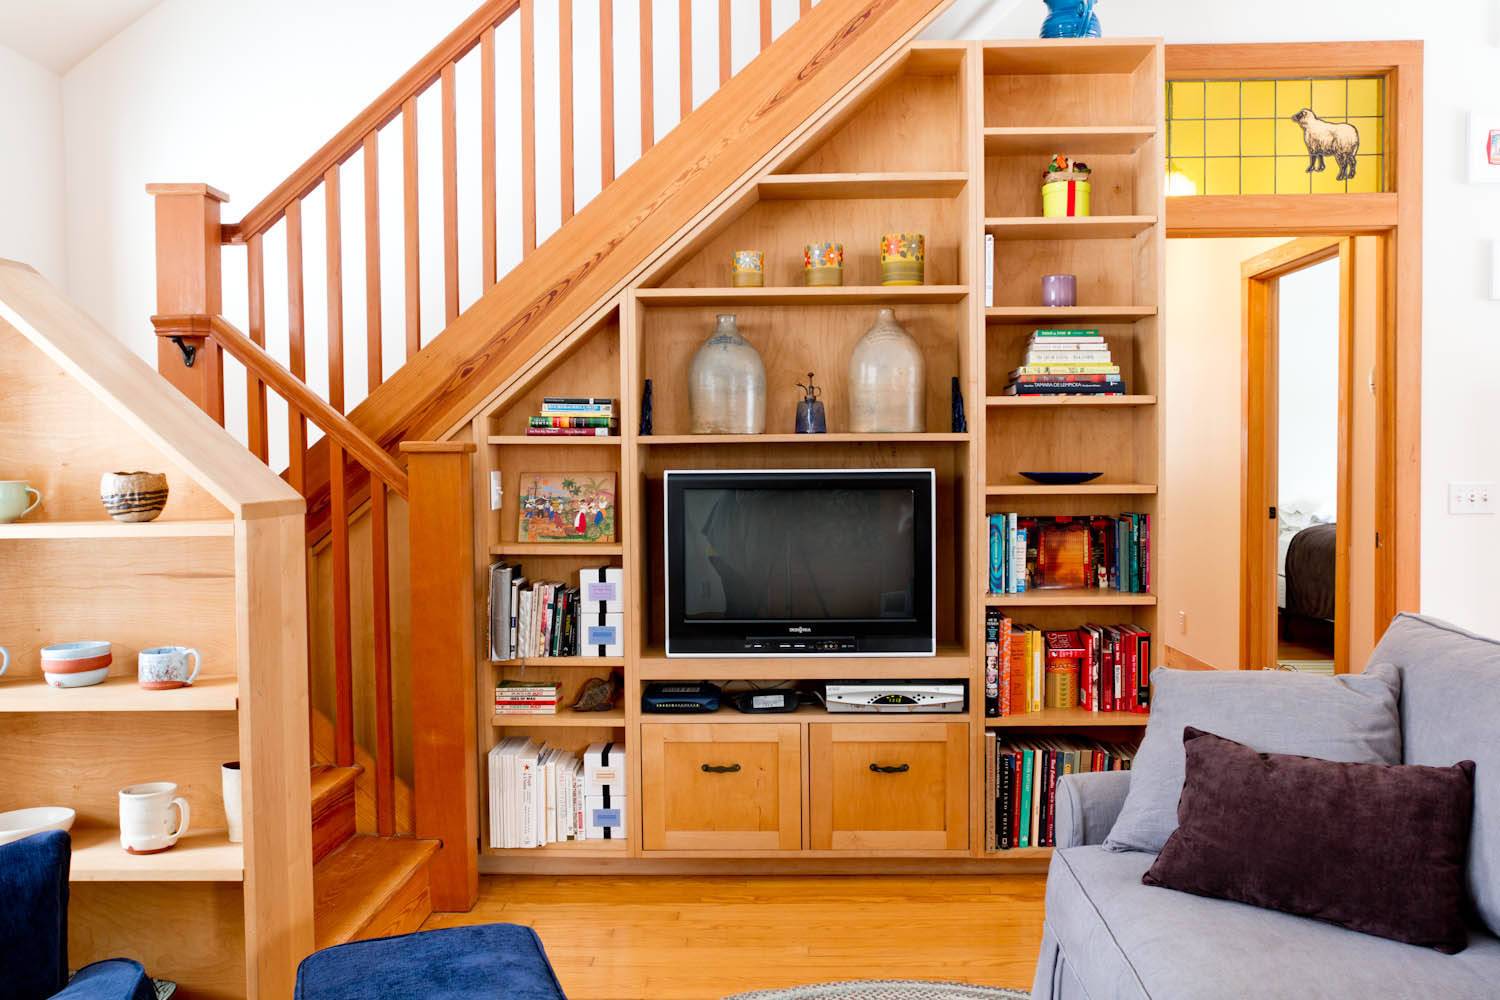 Bespoke TV unit and storage options (from Houzz)